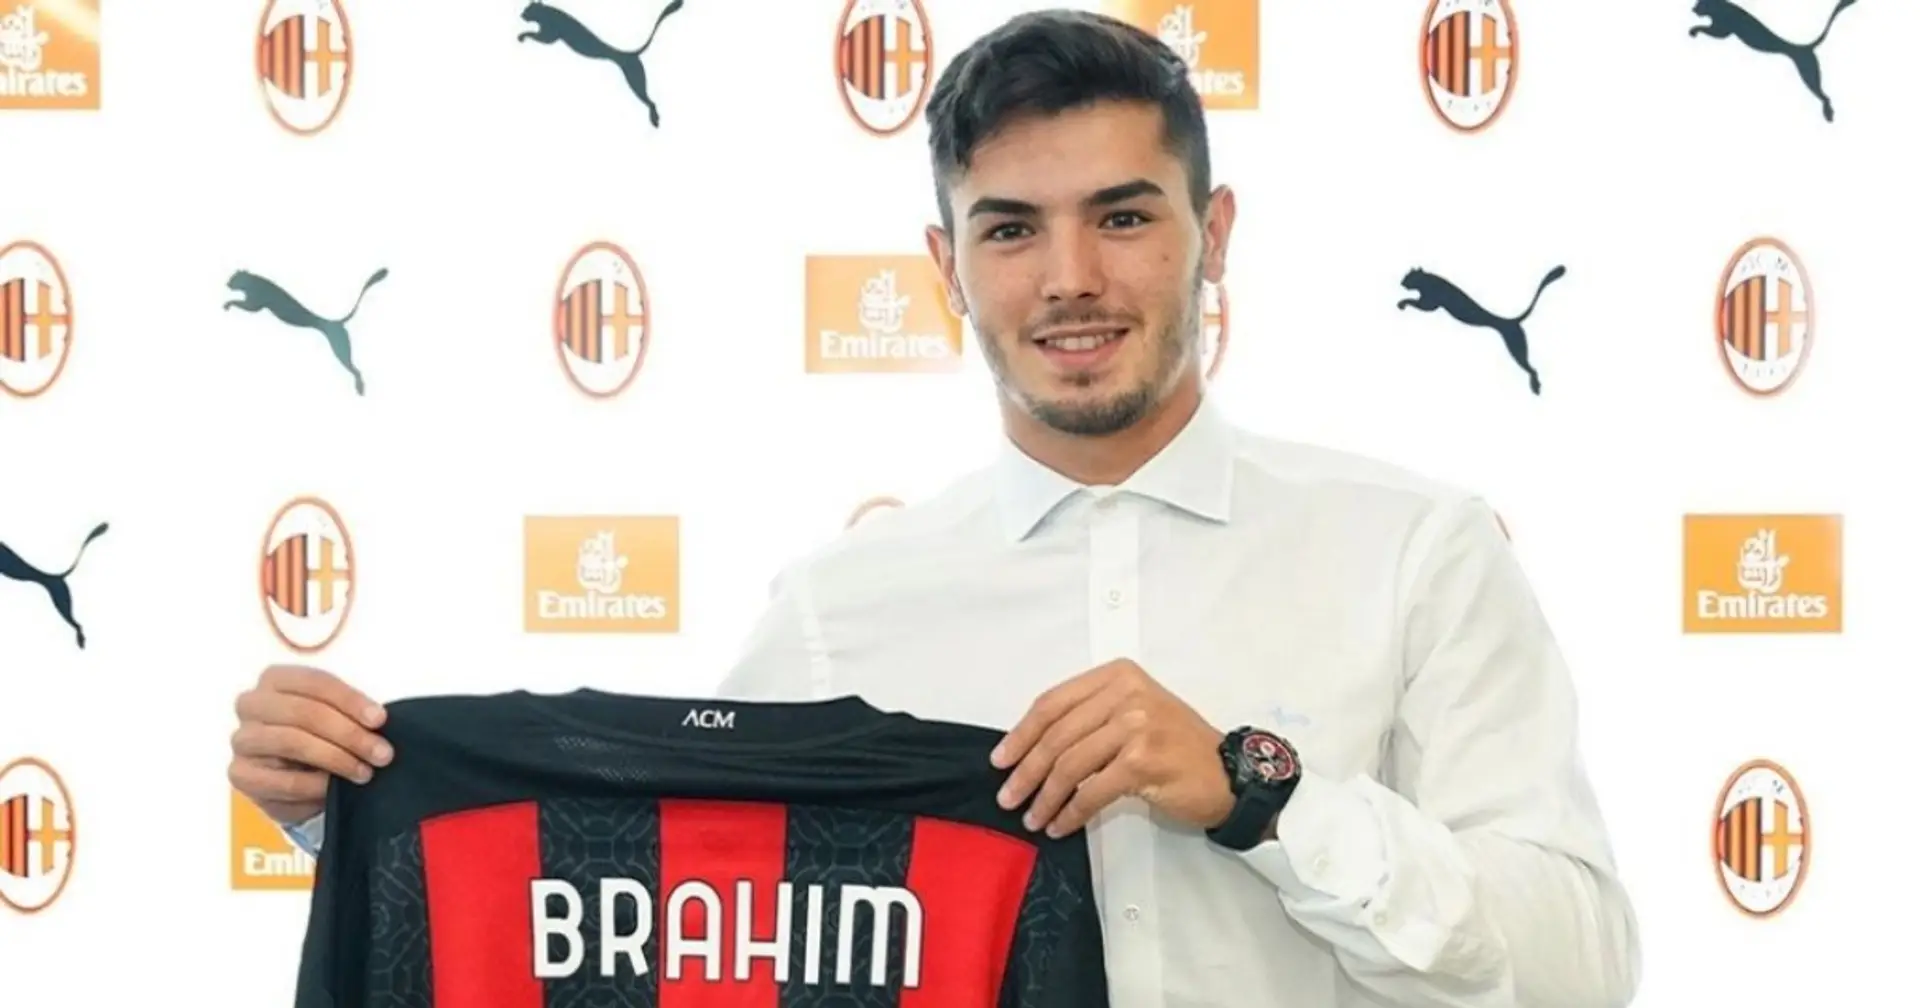 'The game is different': Brahim Diaz believes playing in Italy will make him a better footballer